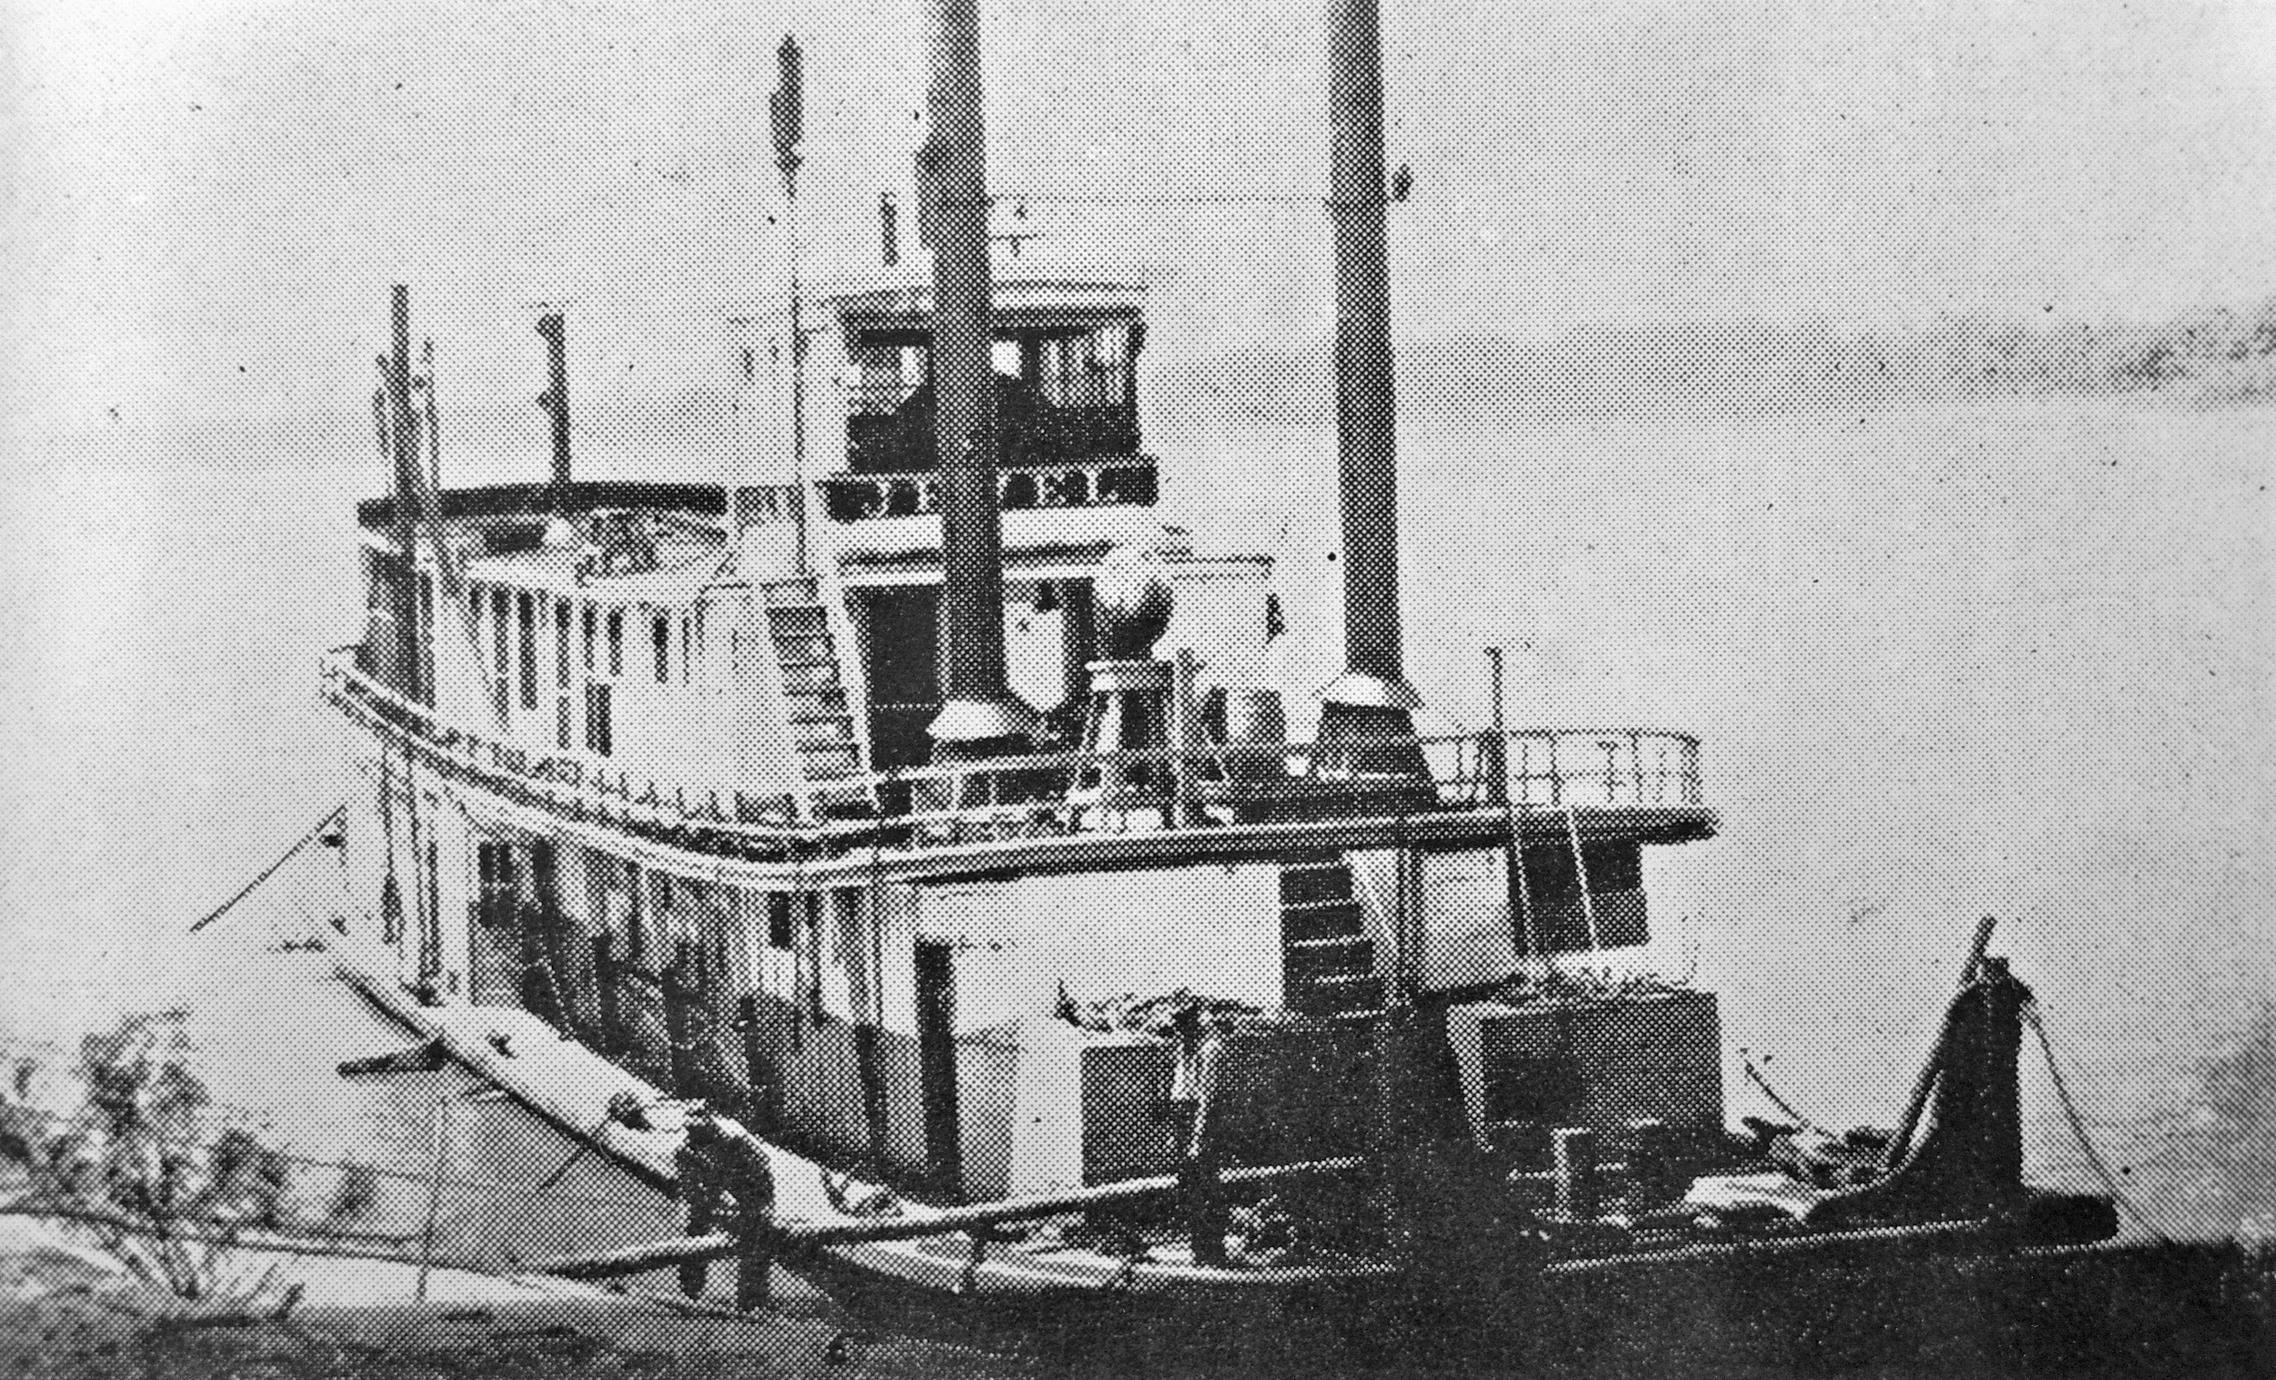 Jewel (Packet/Towboat, 1902-1934)